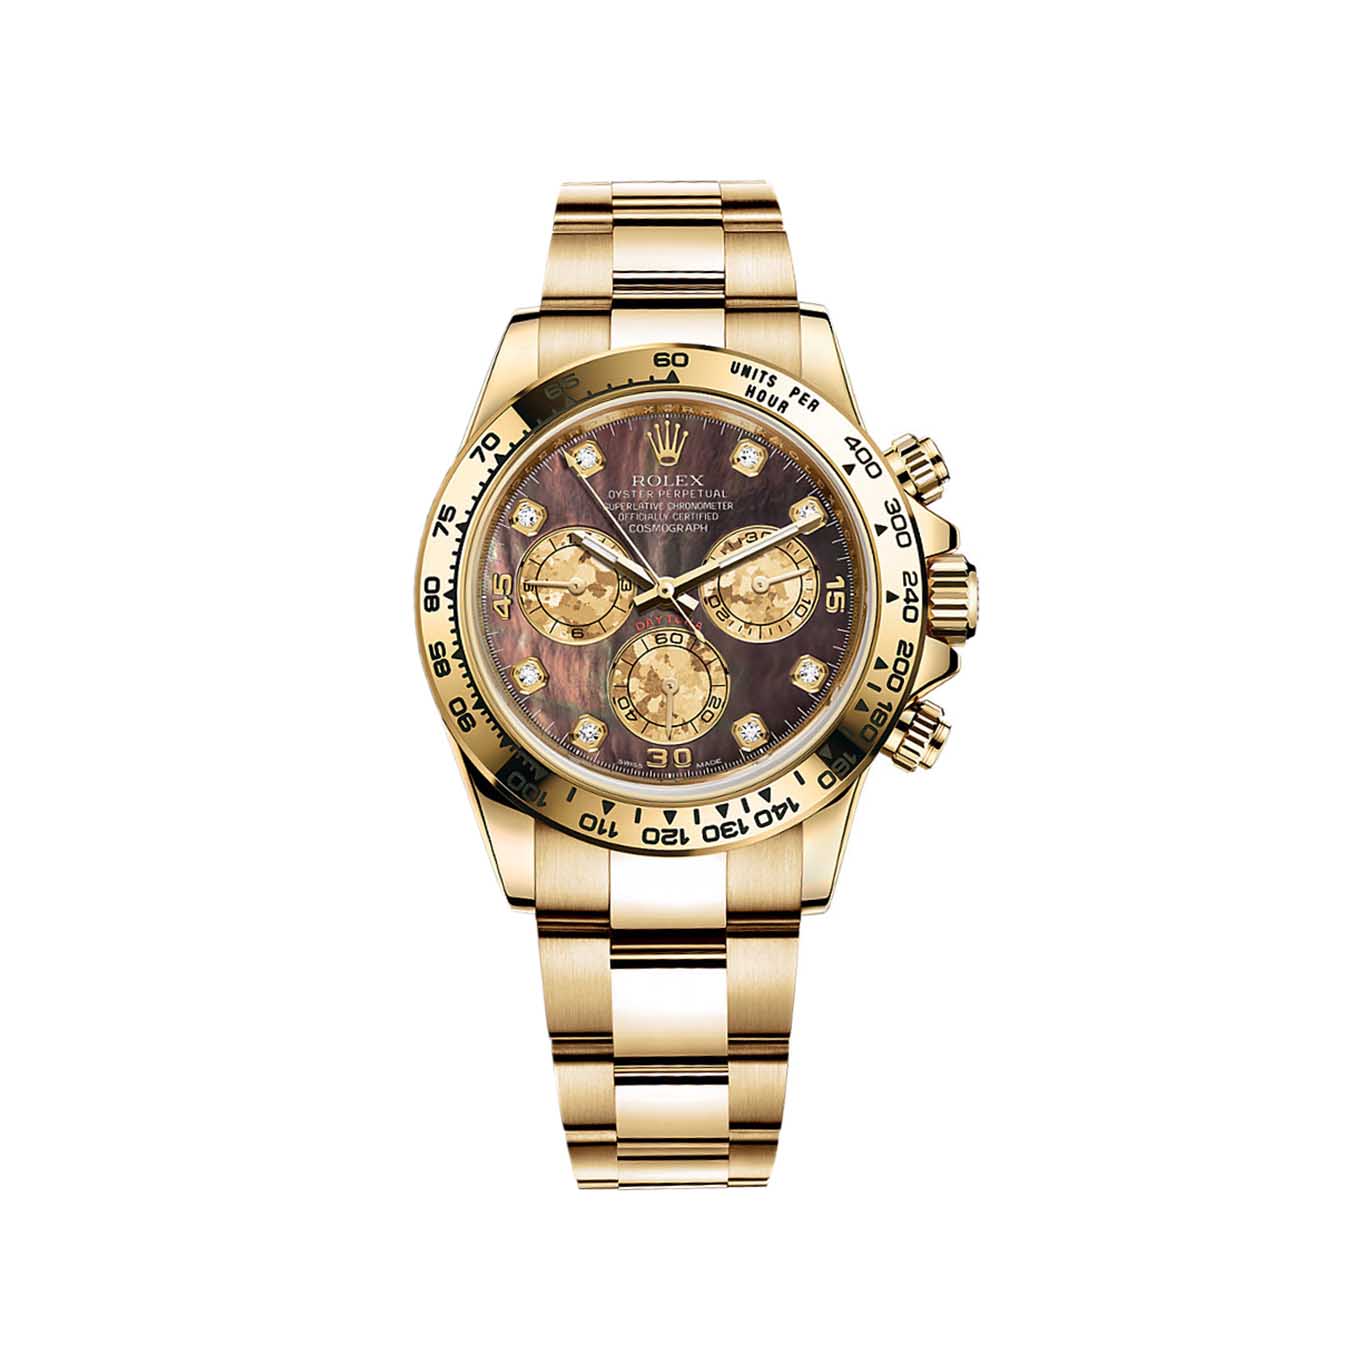 Cosmograph Daytona 116528 Gold Watch (Black Mother-of-Pearl Set with Diamonds)